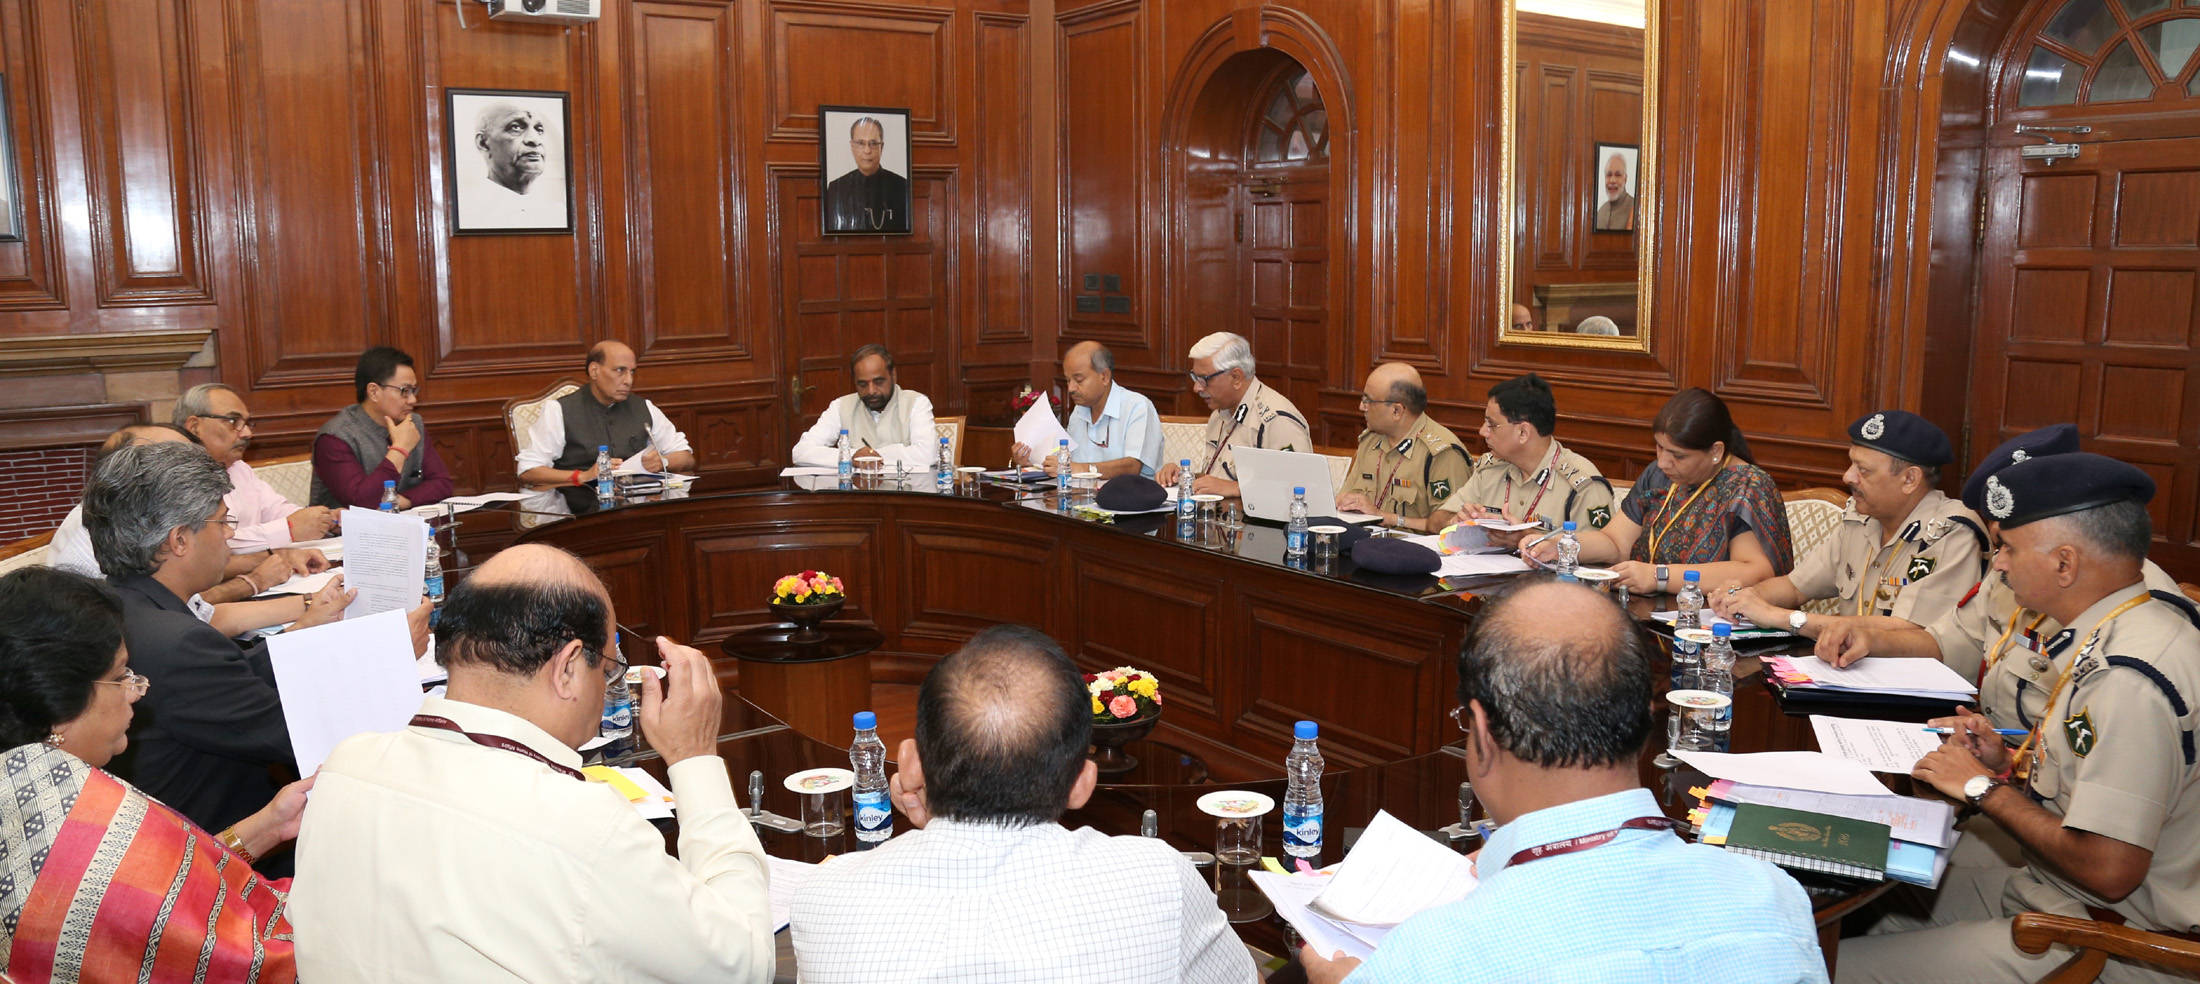 The Union Home Minister, Shri Rajnath Singh reviewing the issues of Indo Tibetan Border Police (ITBP) in a meeting, in New Delhi on September 30, 2016.  The Ministers of State for Home Affairs, Shri Hansraj Gangaram Ahir and Shri Kiren Rijiju, the Union Home Secretary, Shri Rajiv Mehrishi, the Secretary (Border Management), Shri Susheel Kumar, the Director General, ITBP, Shri D.K. Chaudhary and senior officers from ITBP and MHA are also seen.